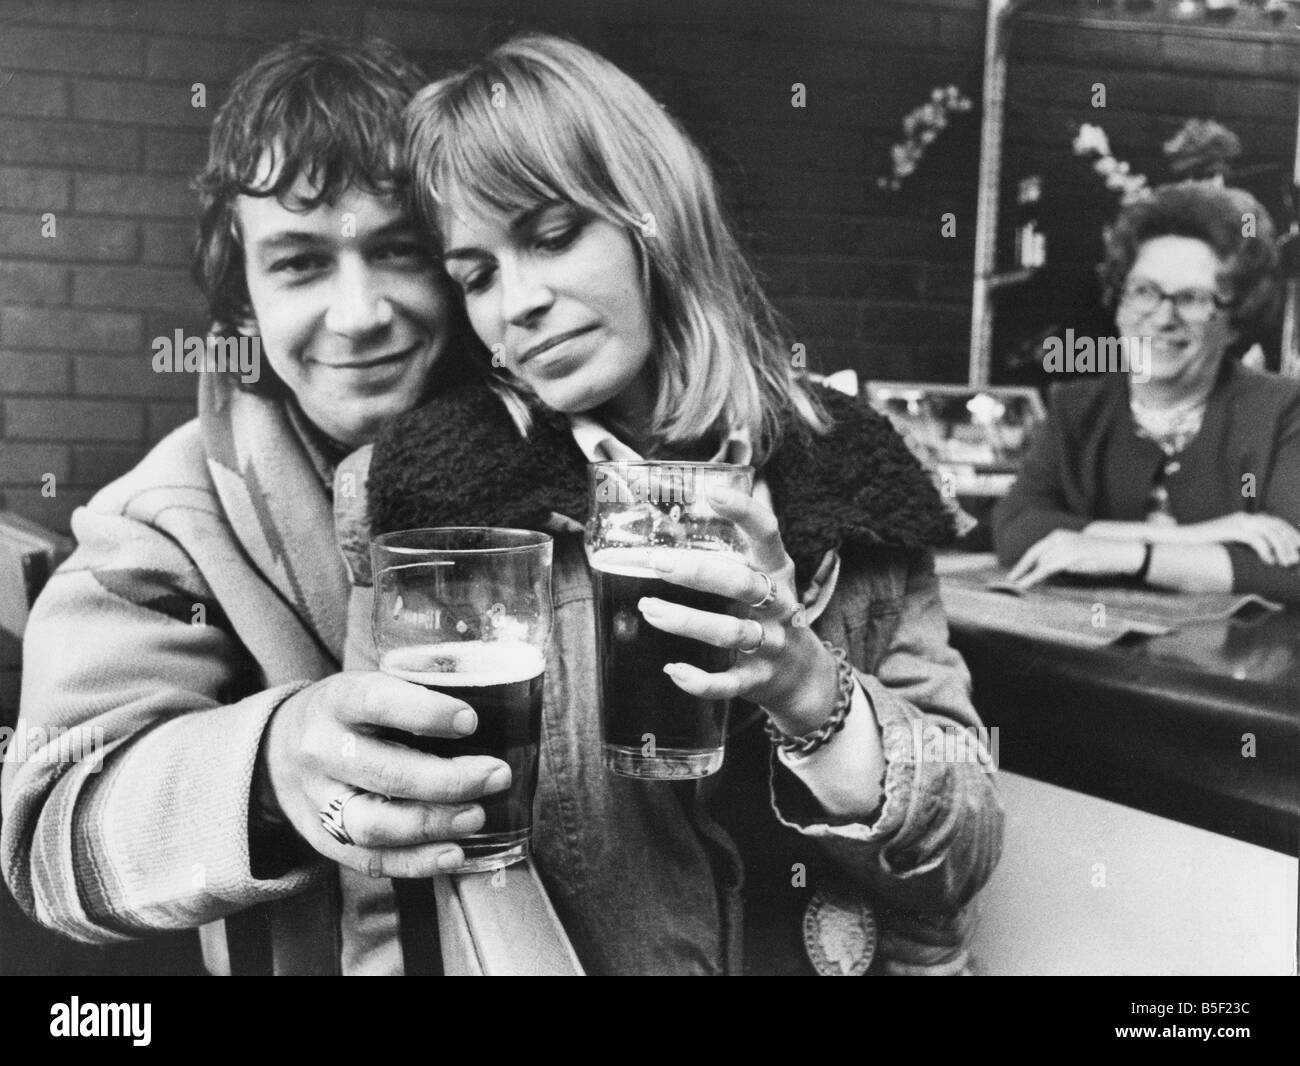 Eric Burdon the former singer of the group The Animals returned to Tyneside  with his wife Rose to introduce her to his parents 29 08 73 Stock Photo -  Alamy